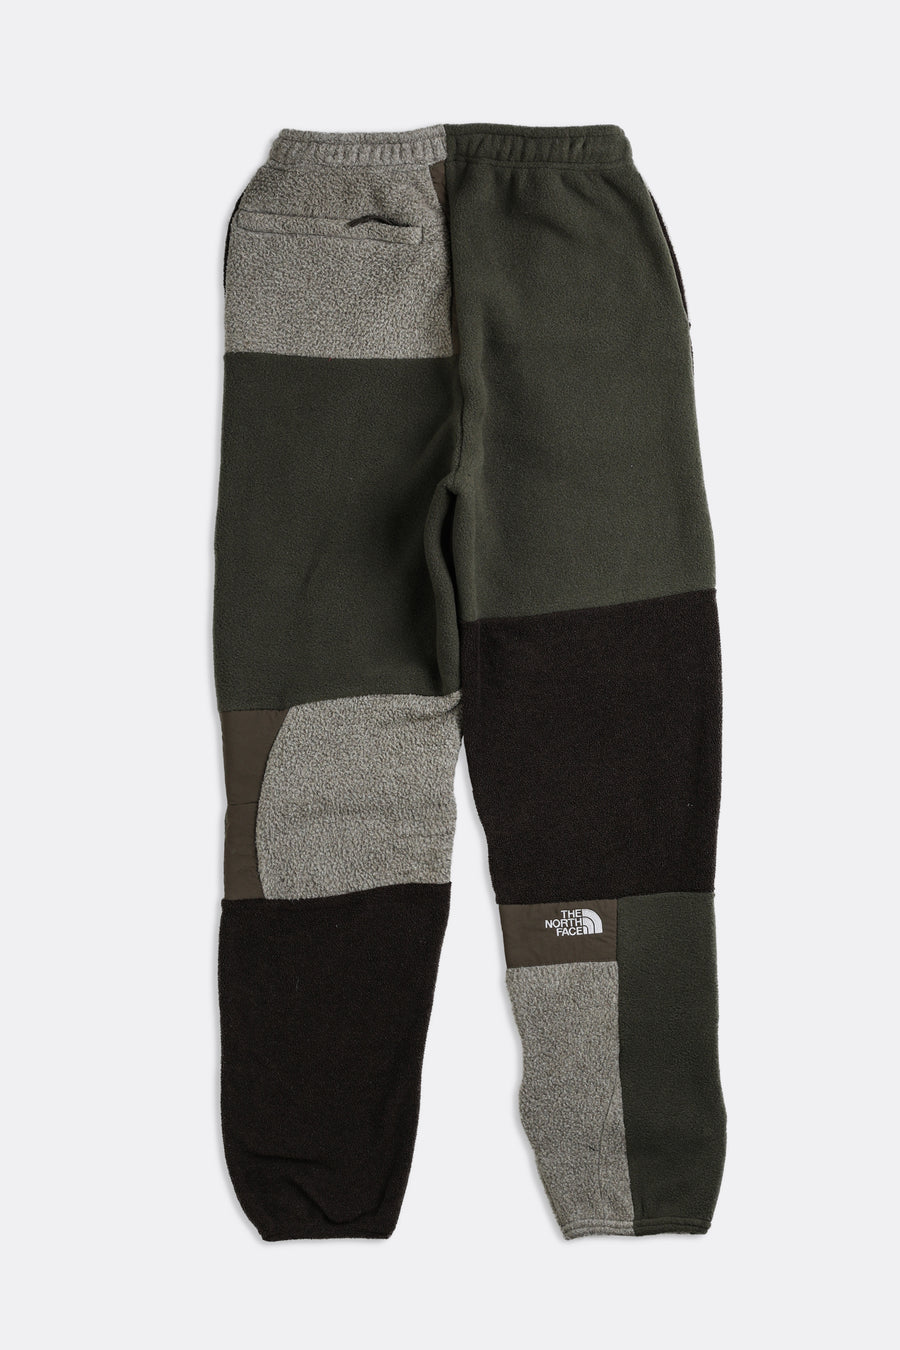 The North Face Himalayan Down Pants  Mens  REI Coop